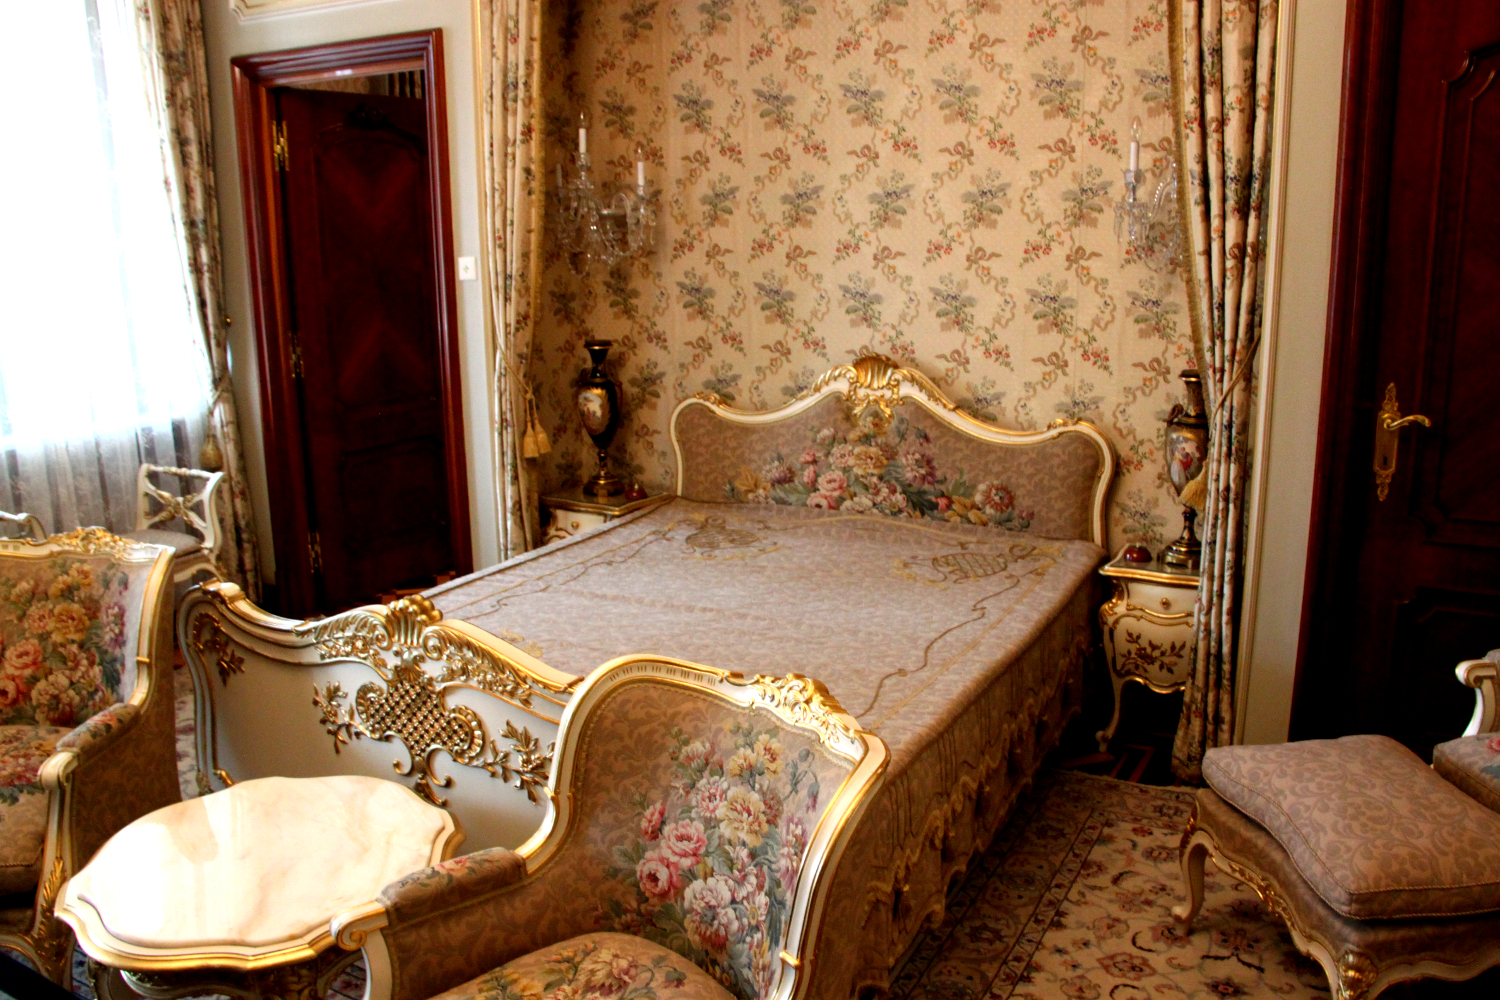 Primaverii (Spring) Palace, Ceausescu’s private residence - Elena Ceausescu's bedroom